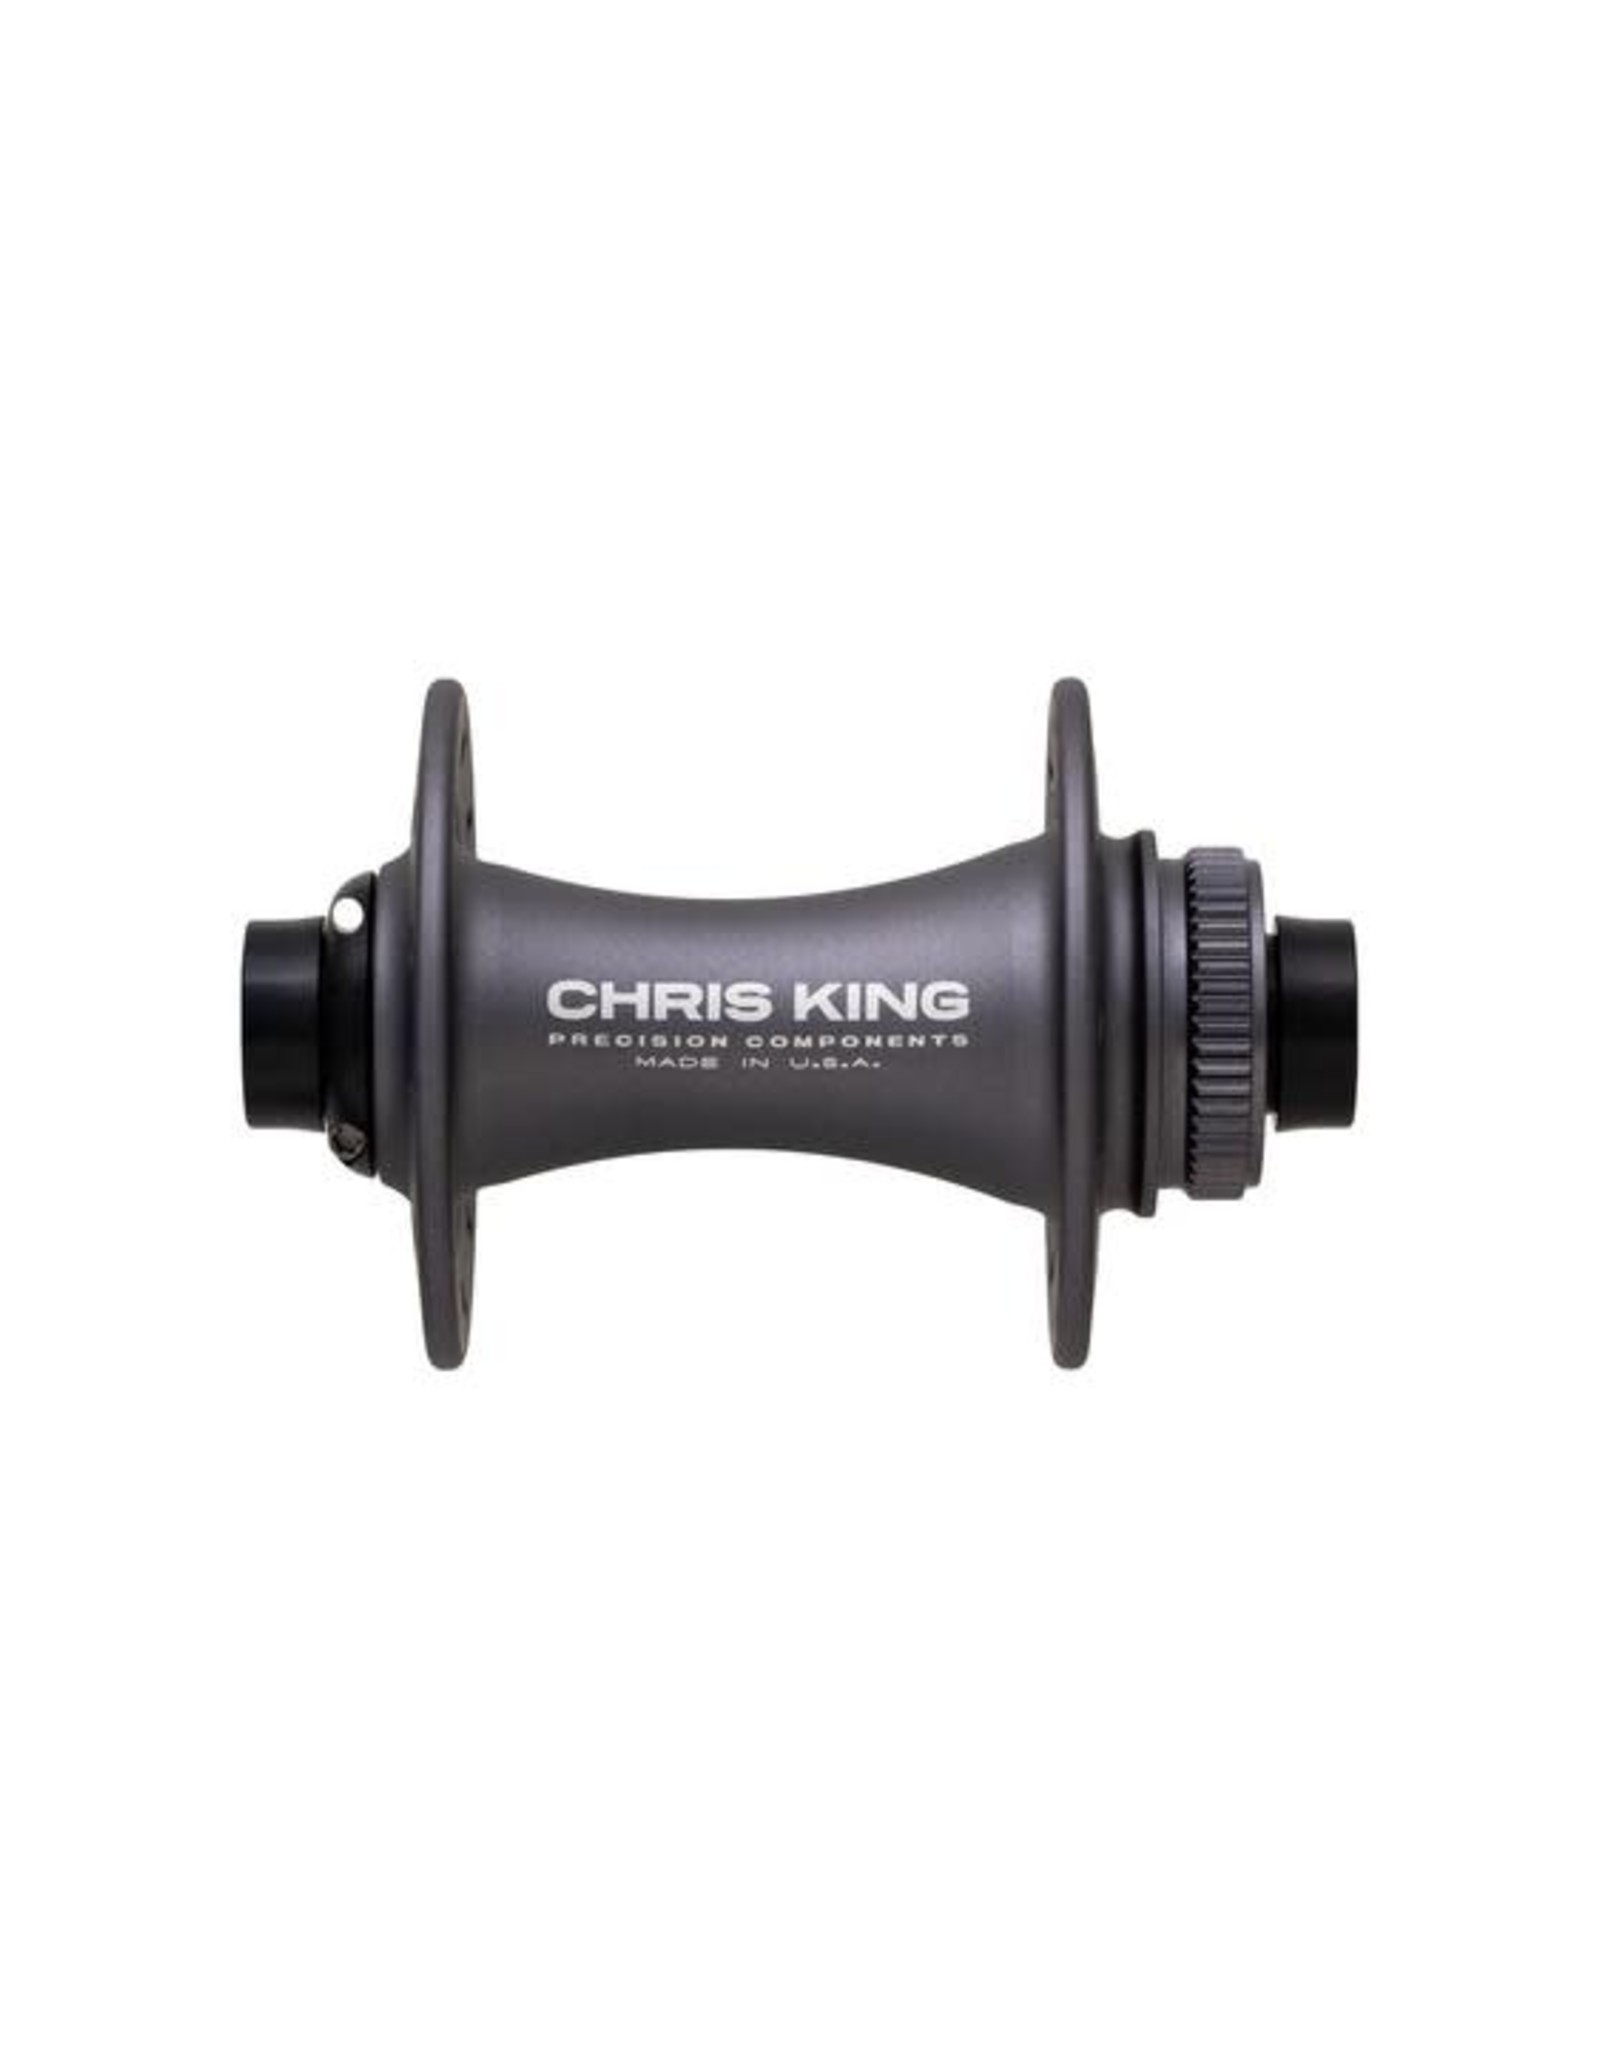 Chris King Components Chris King Front Boost, 15x110, Centerlock